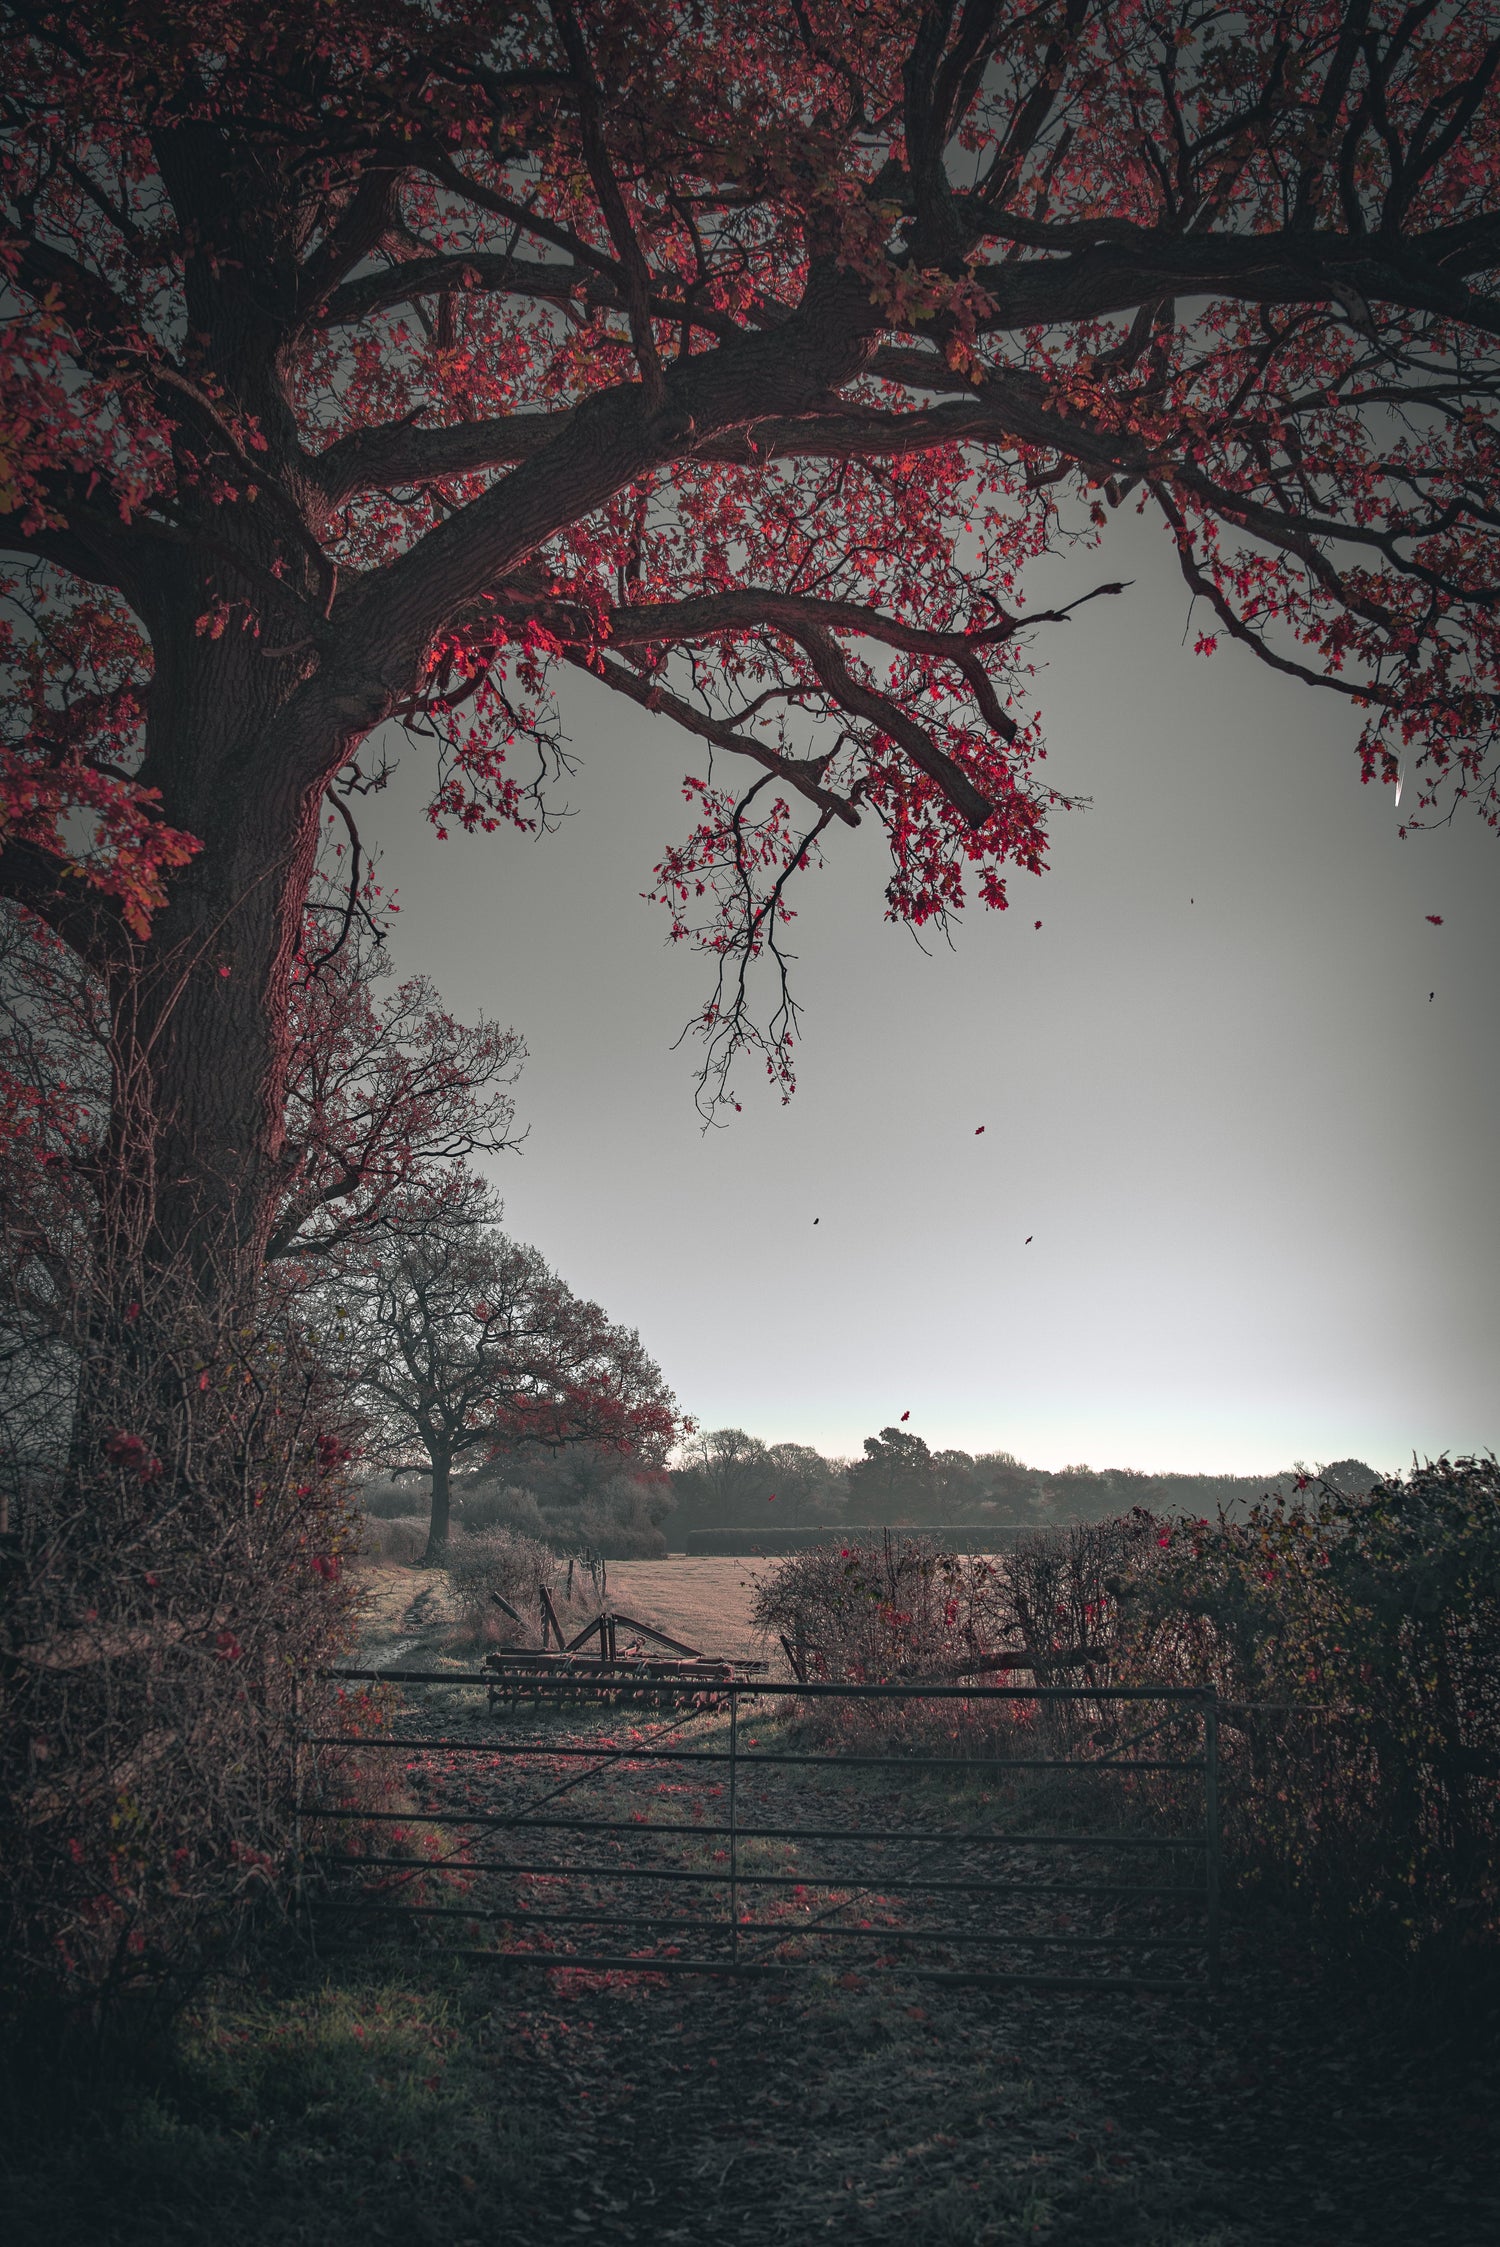 Art photography of tree on a farm with falling red leaves and agricultural machinery in a background